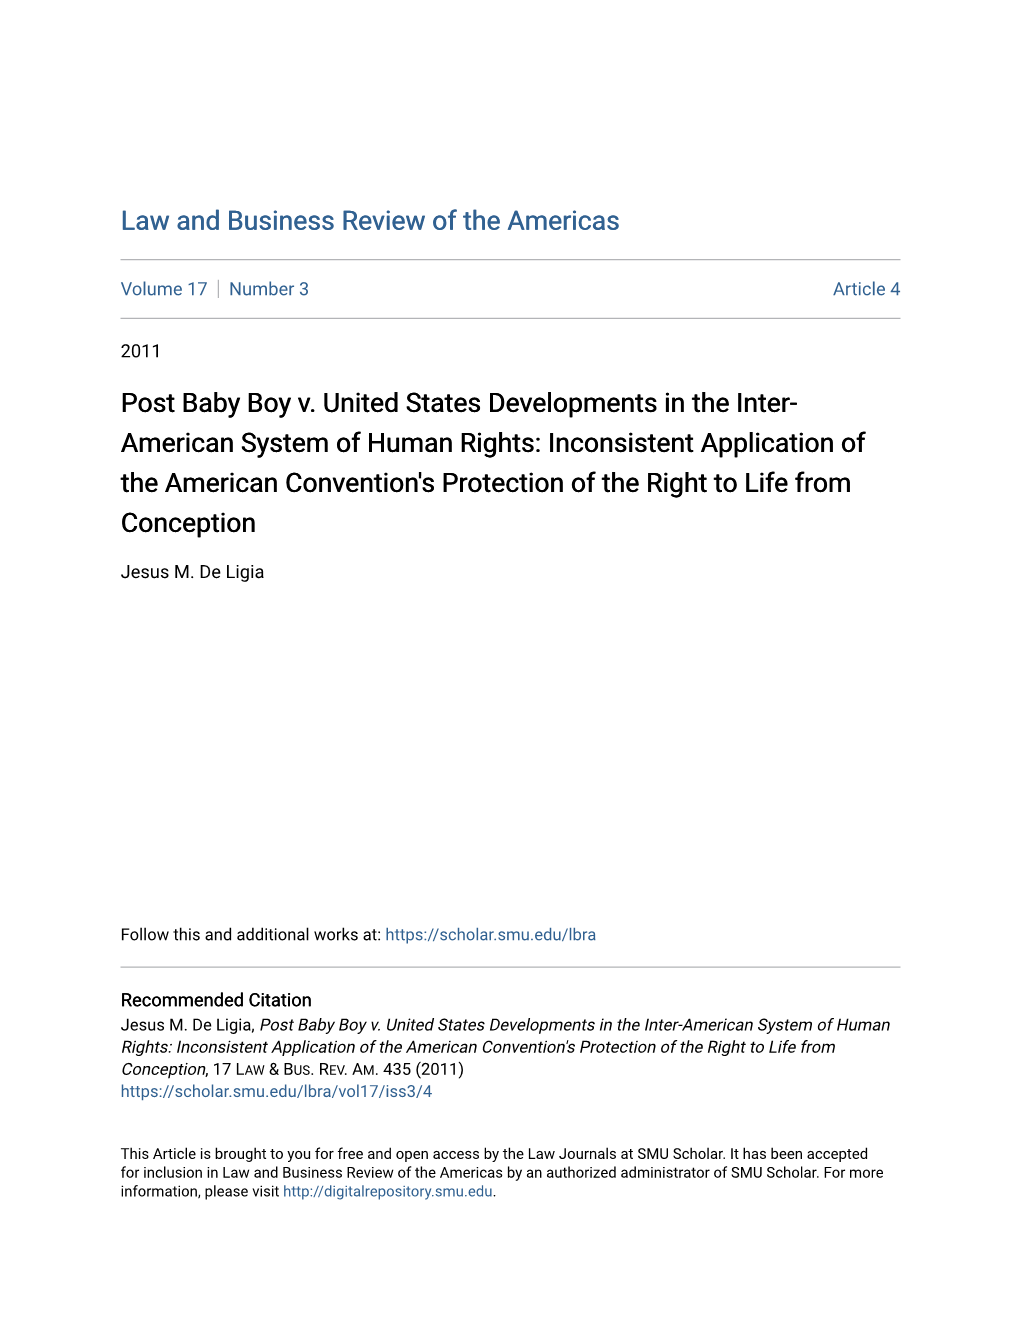 Post Baby Boy V. United States Developments in the Inter-American